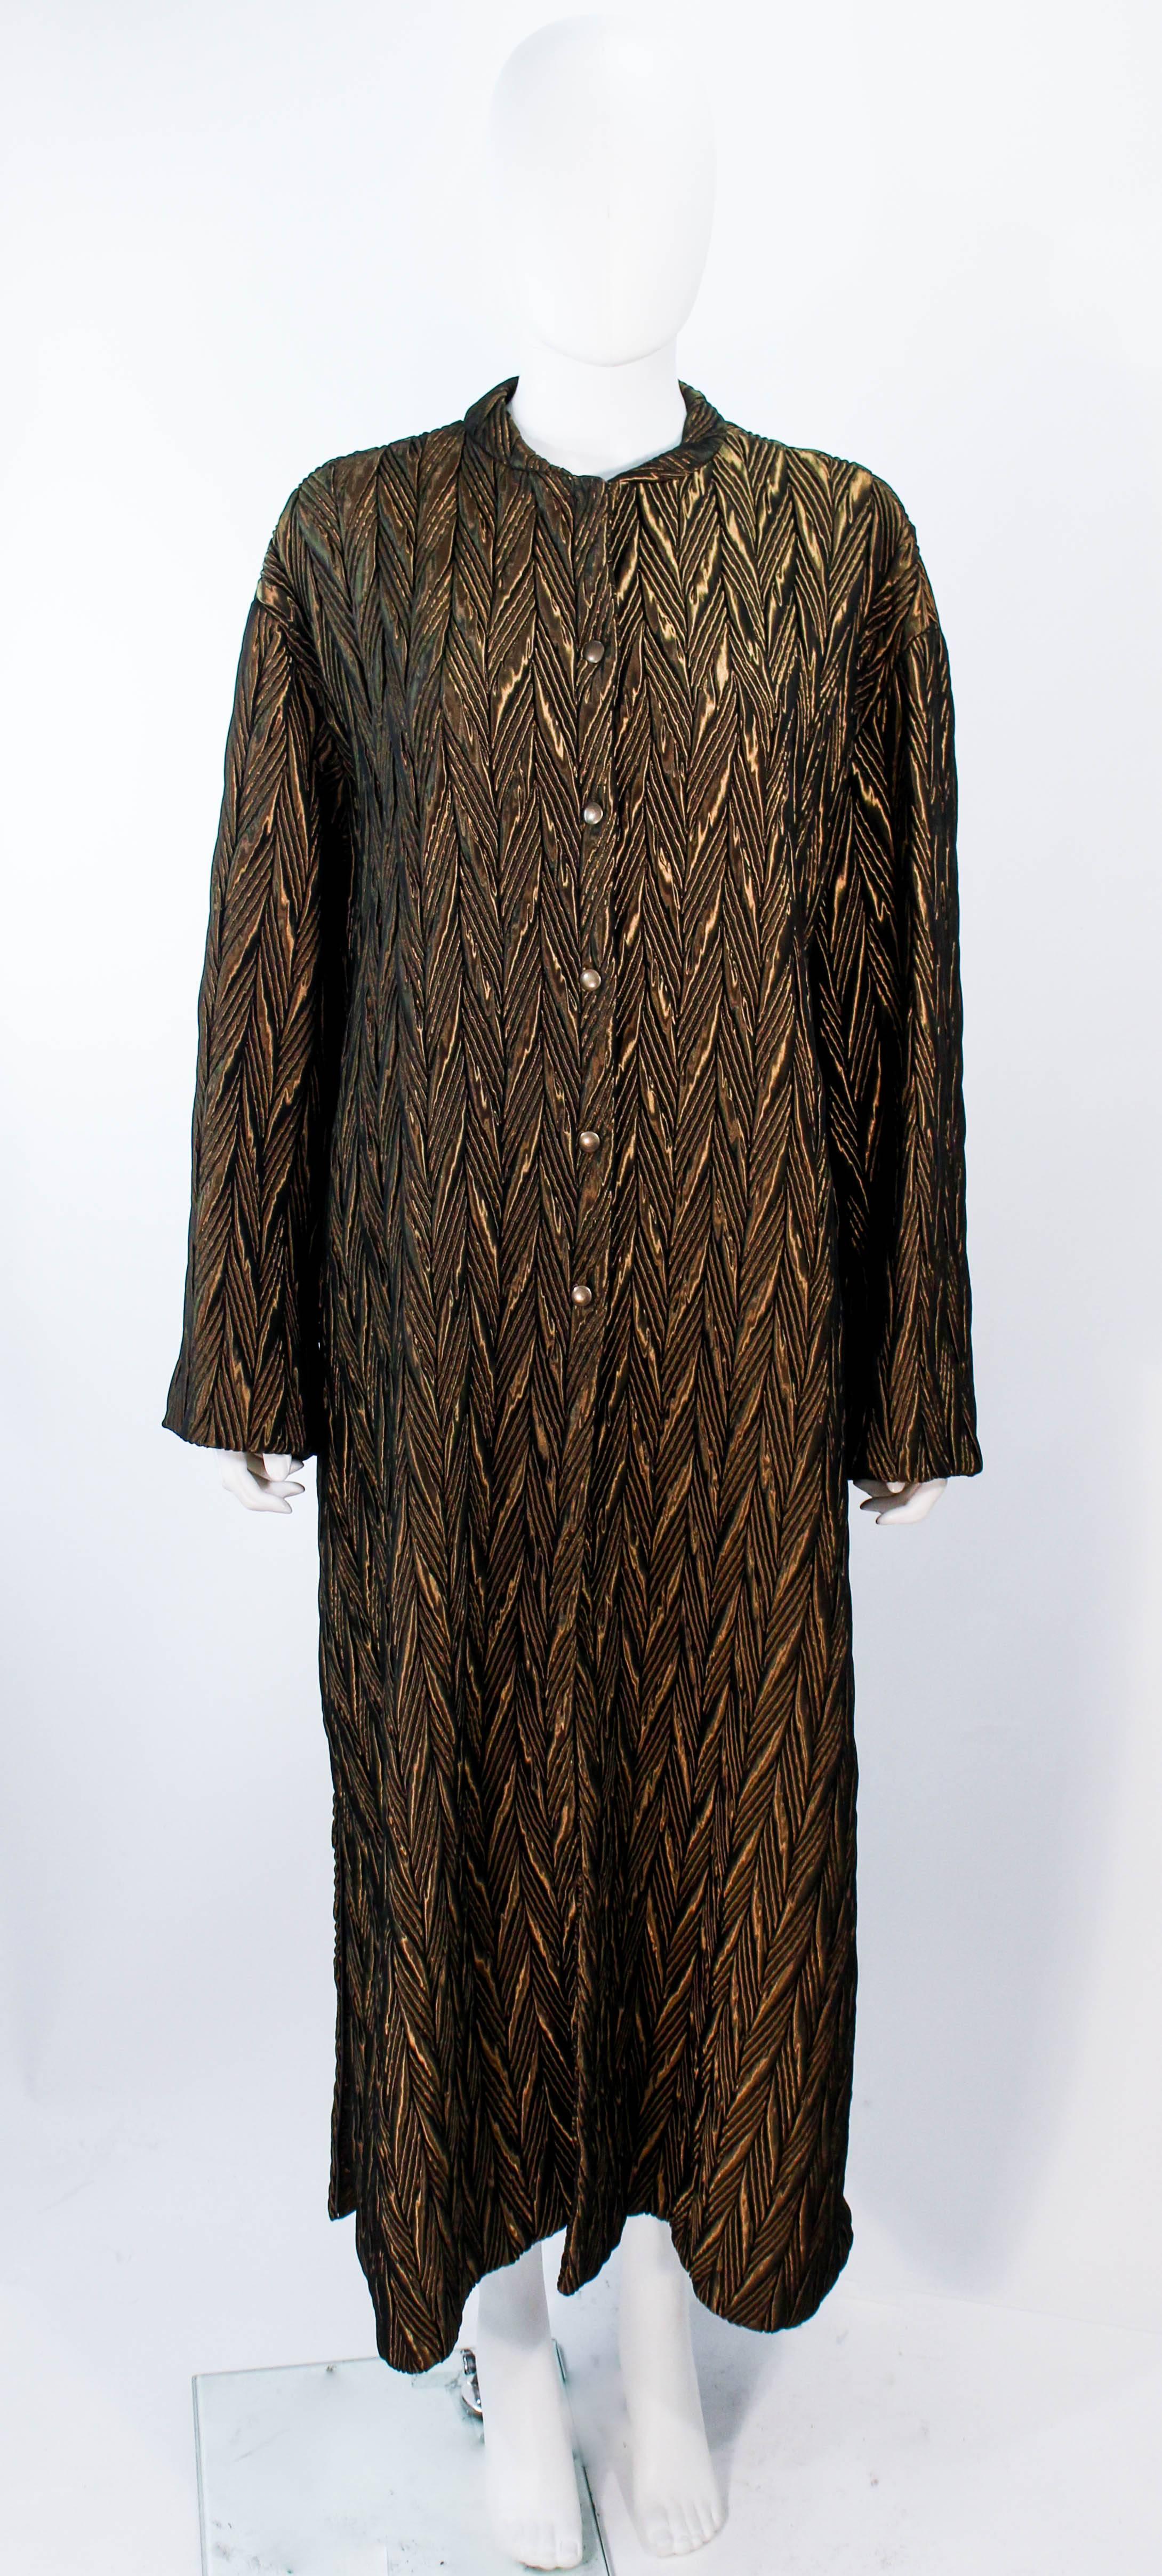 Armani floor-length coat 
Bronze olive nylon blend 
Quilted in a chevron pattern 
Side zippers 
Bronze snap closures 
Silk lined 
Made in Italy 